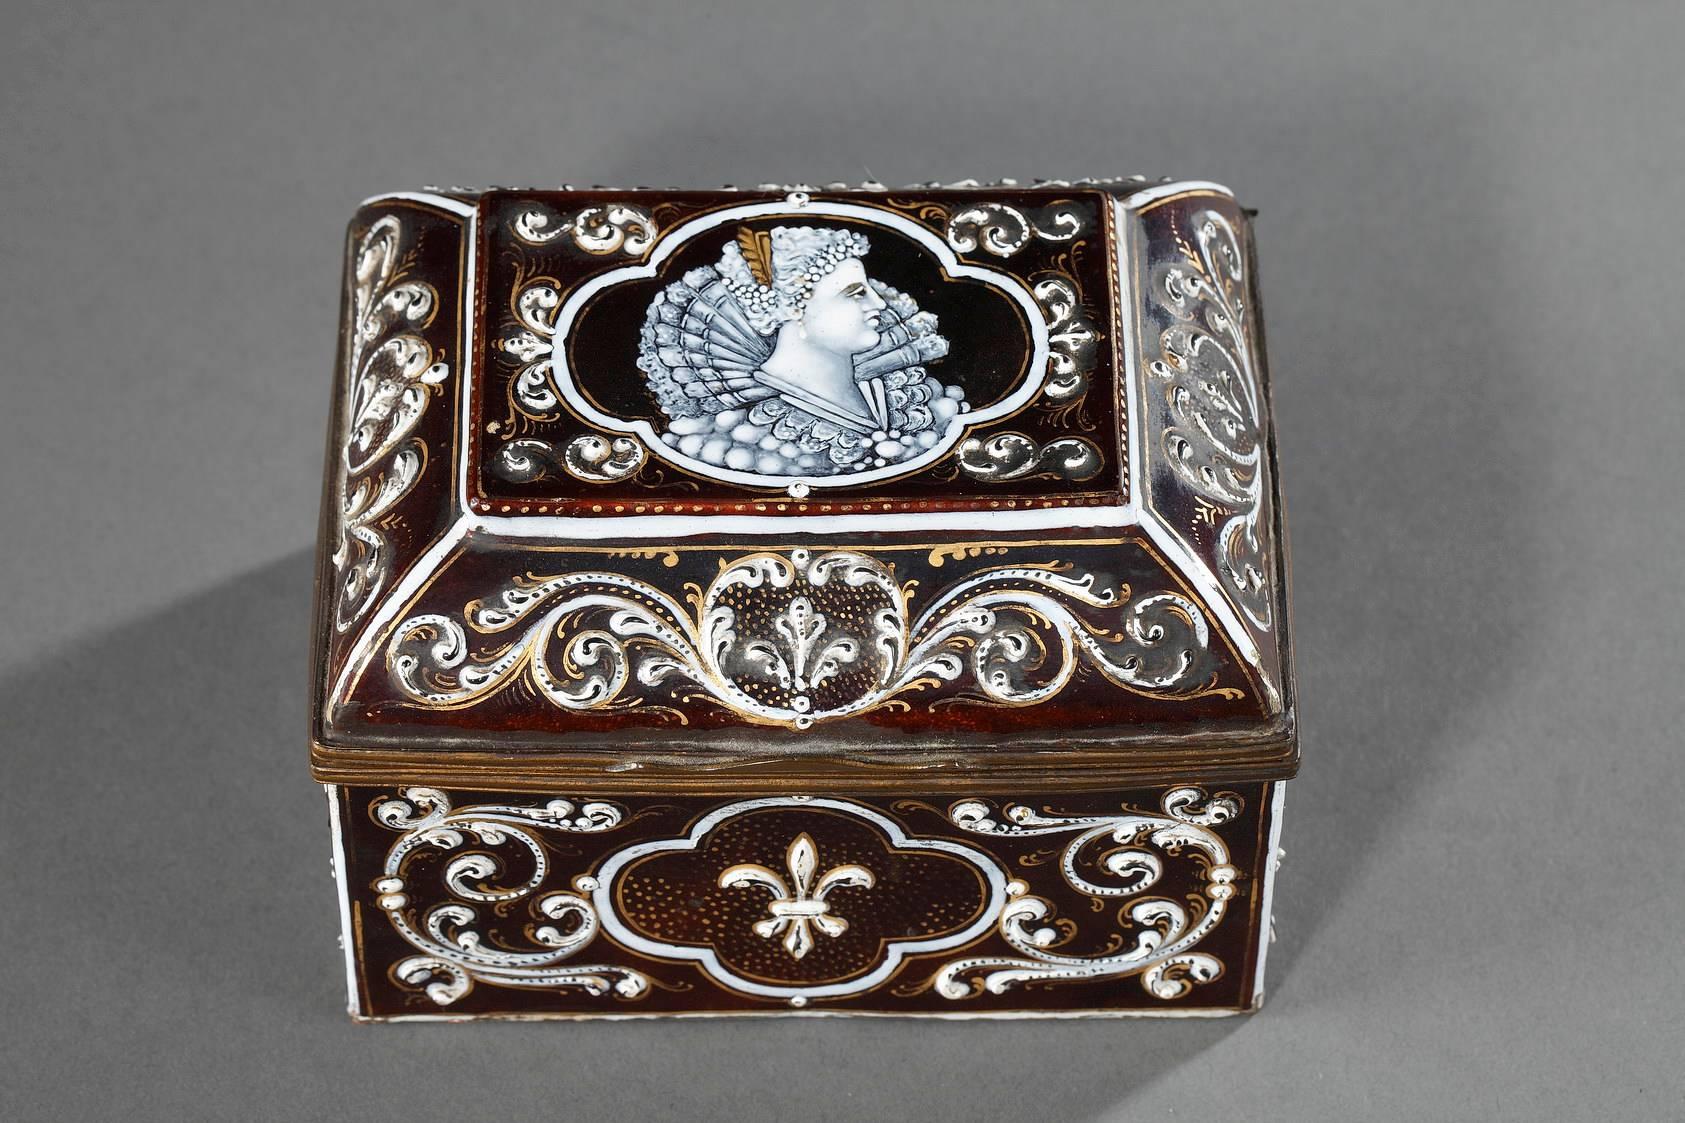 Small, rectangular, enamel keepsake box from Limoges. The lid is decorated with a central medallion featuring the profile of an upper-class woman, who was certainly the owner of this late 19th century box. Polylobed medallions adorn the four sides